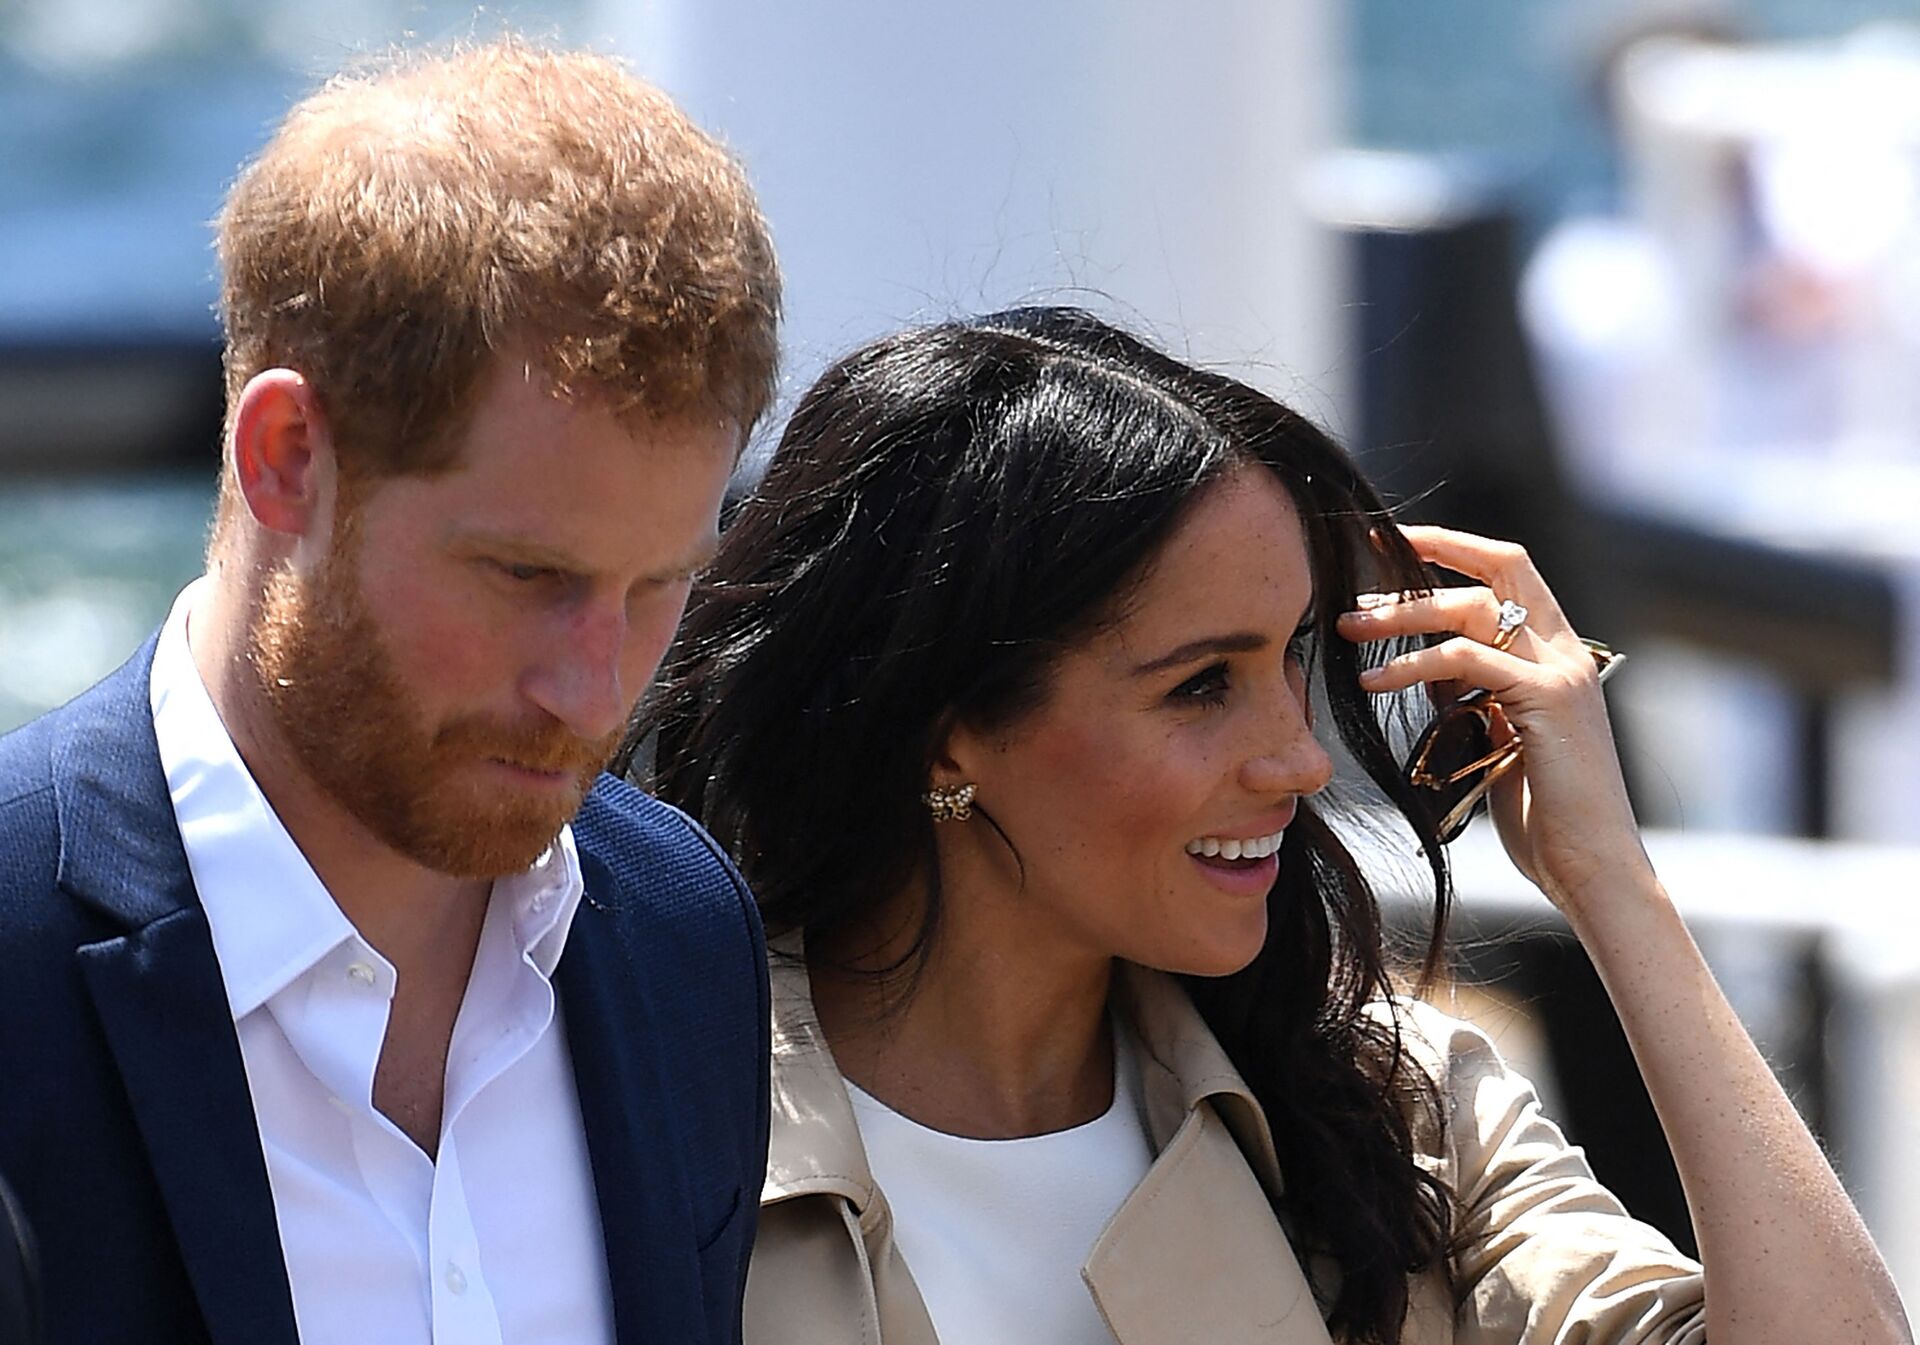 From Princess to President: What are Meghan Markle's Chances of Making It to the White House? - Sputnik International, 1920, 16.03.2021